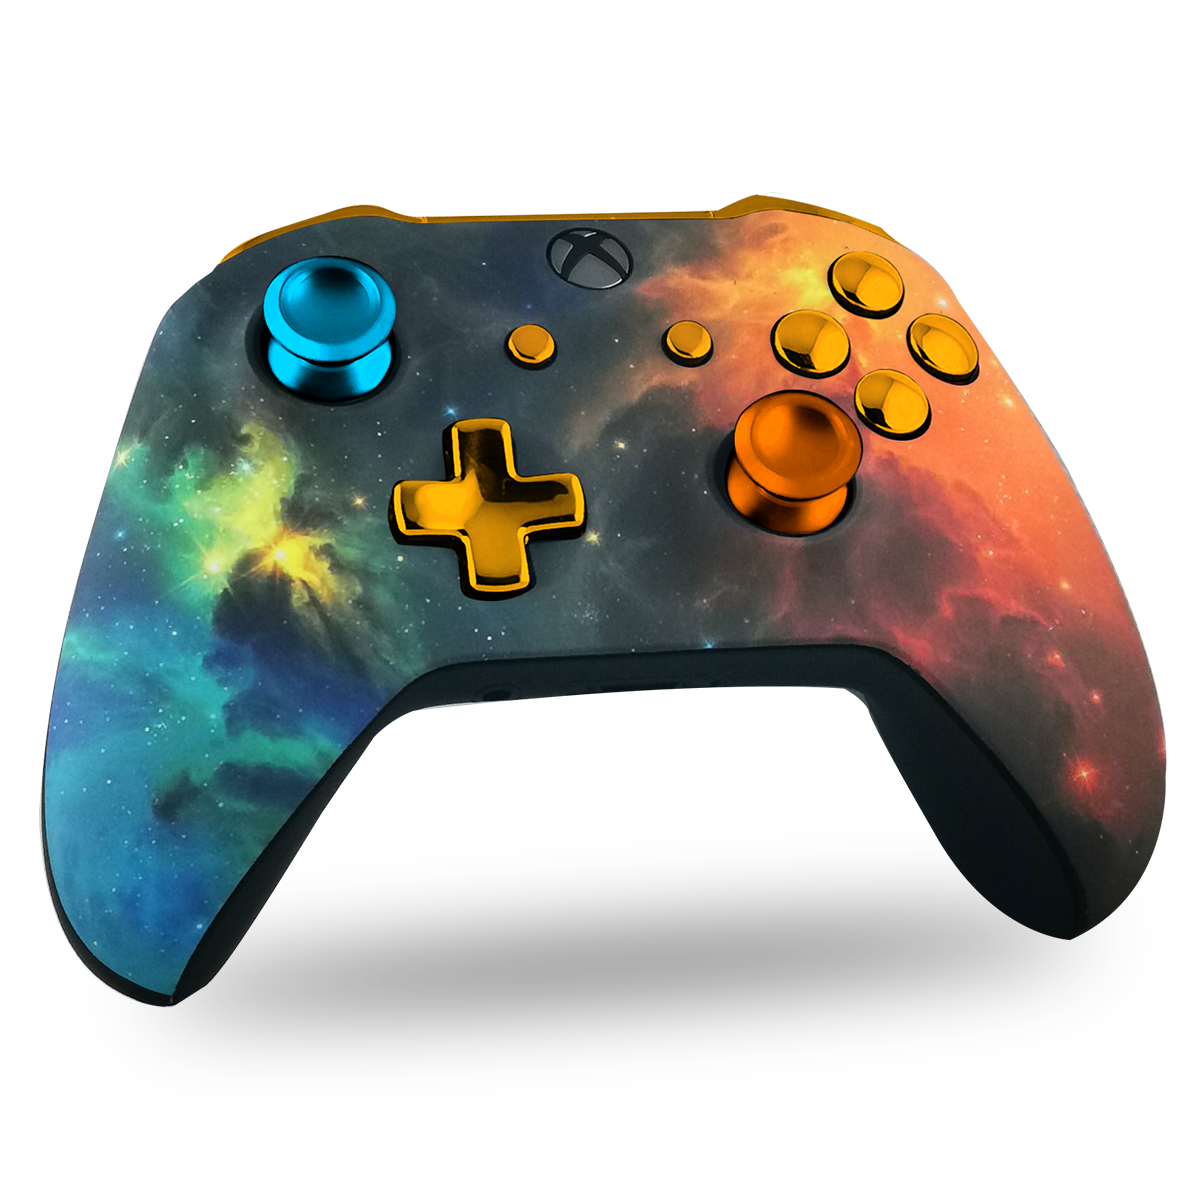 https://www.drawmypad.com/wp-content/uploads/manette-XBOX-one-custom-S-personnalisee-drawmypad-orion-1.png